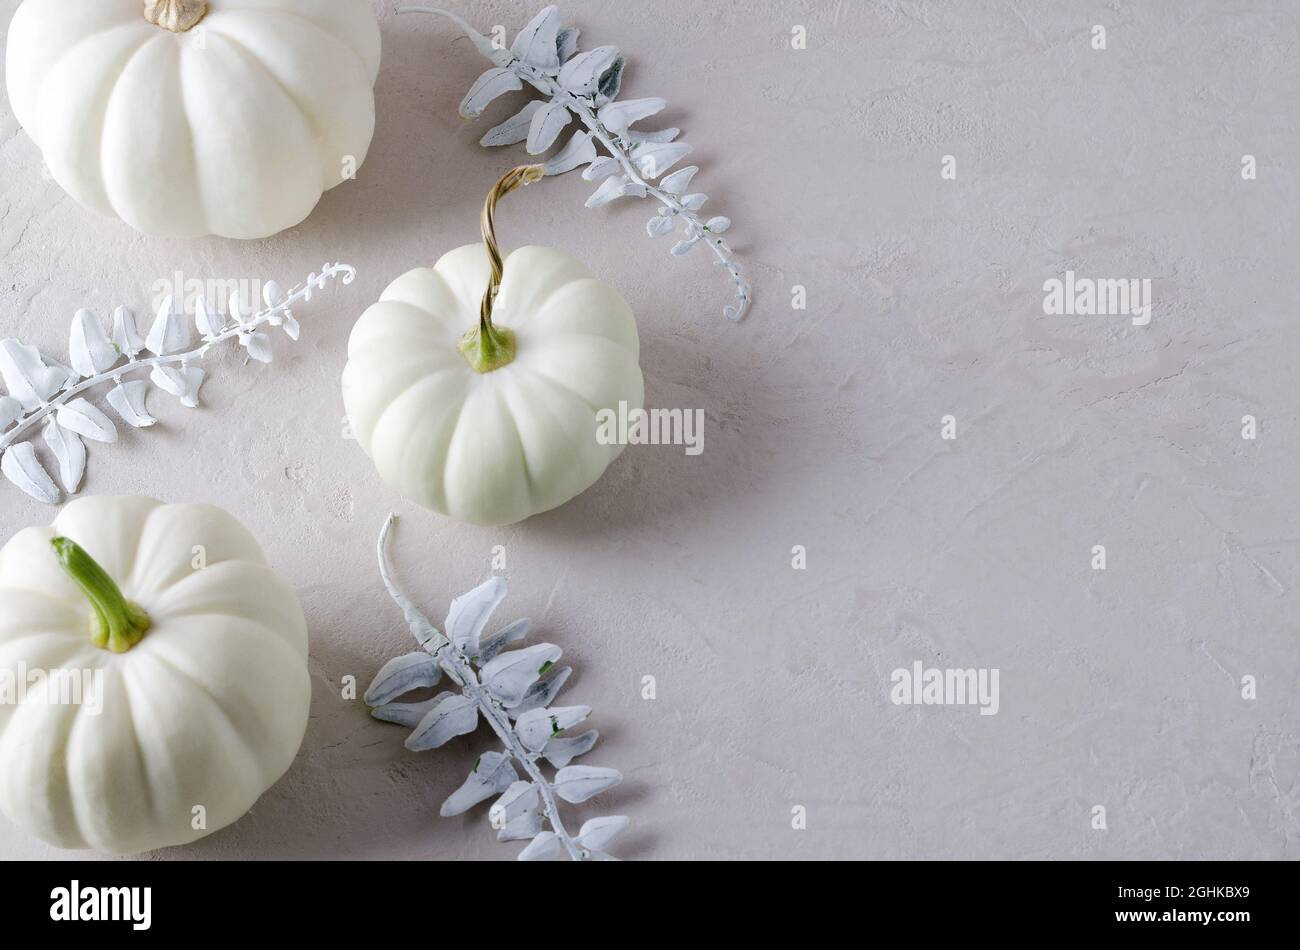 Minimalism. Autumn background with white pumpkins and decorative leaves, copying text, selective focus Stock Photo